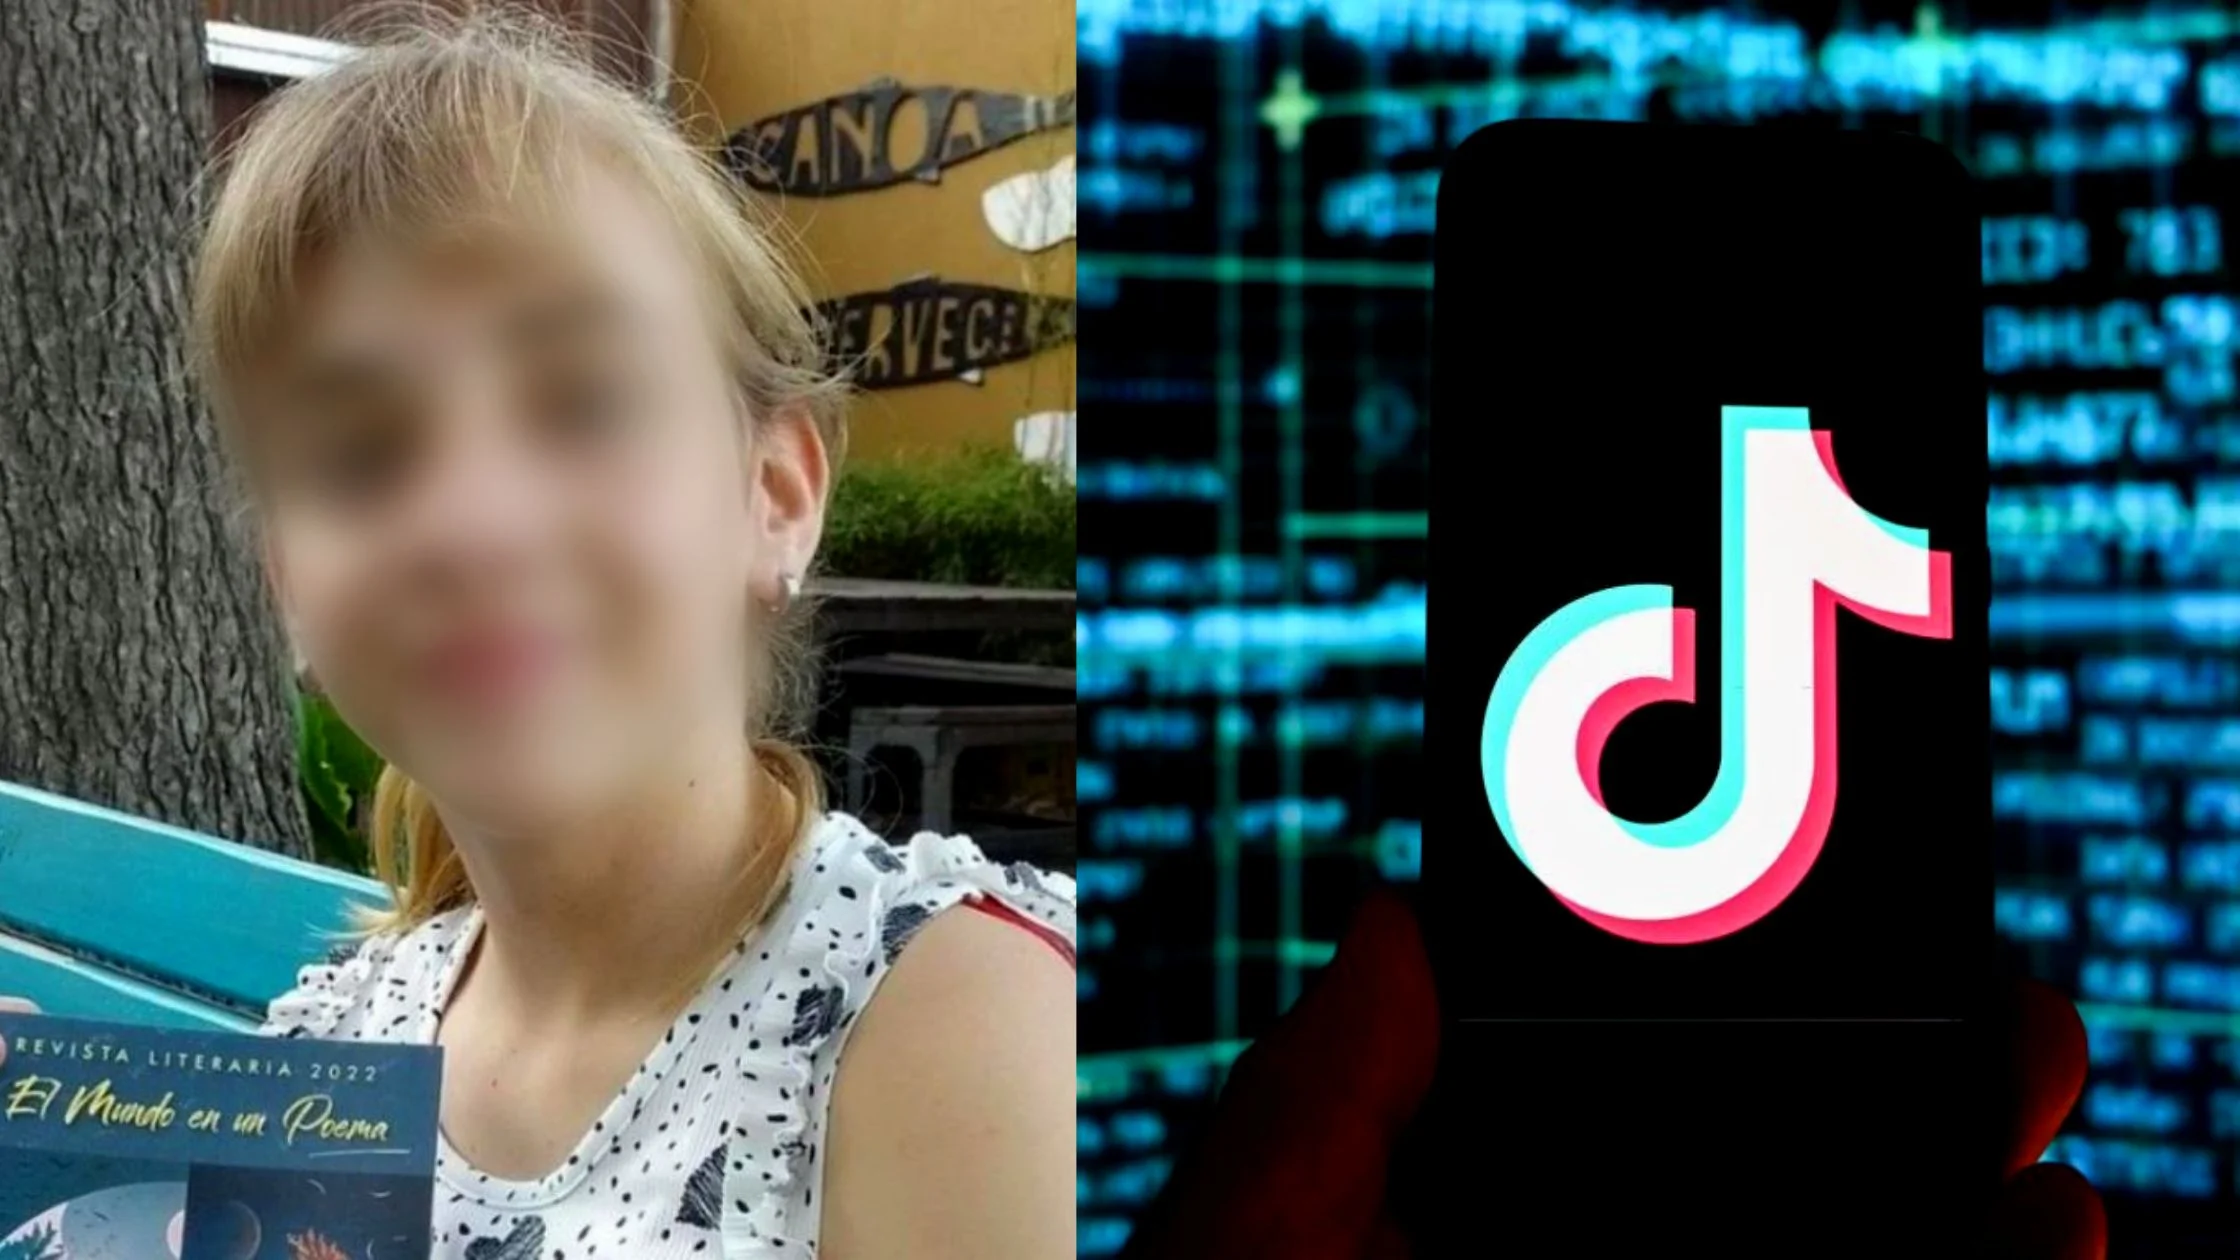 An Argentinian Girl,12, Died After Accepting The TikTok Chocking Challenge